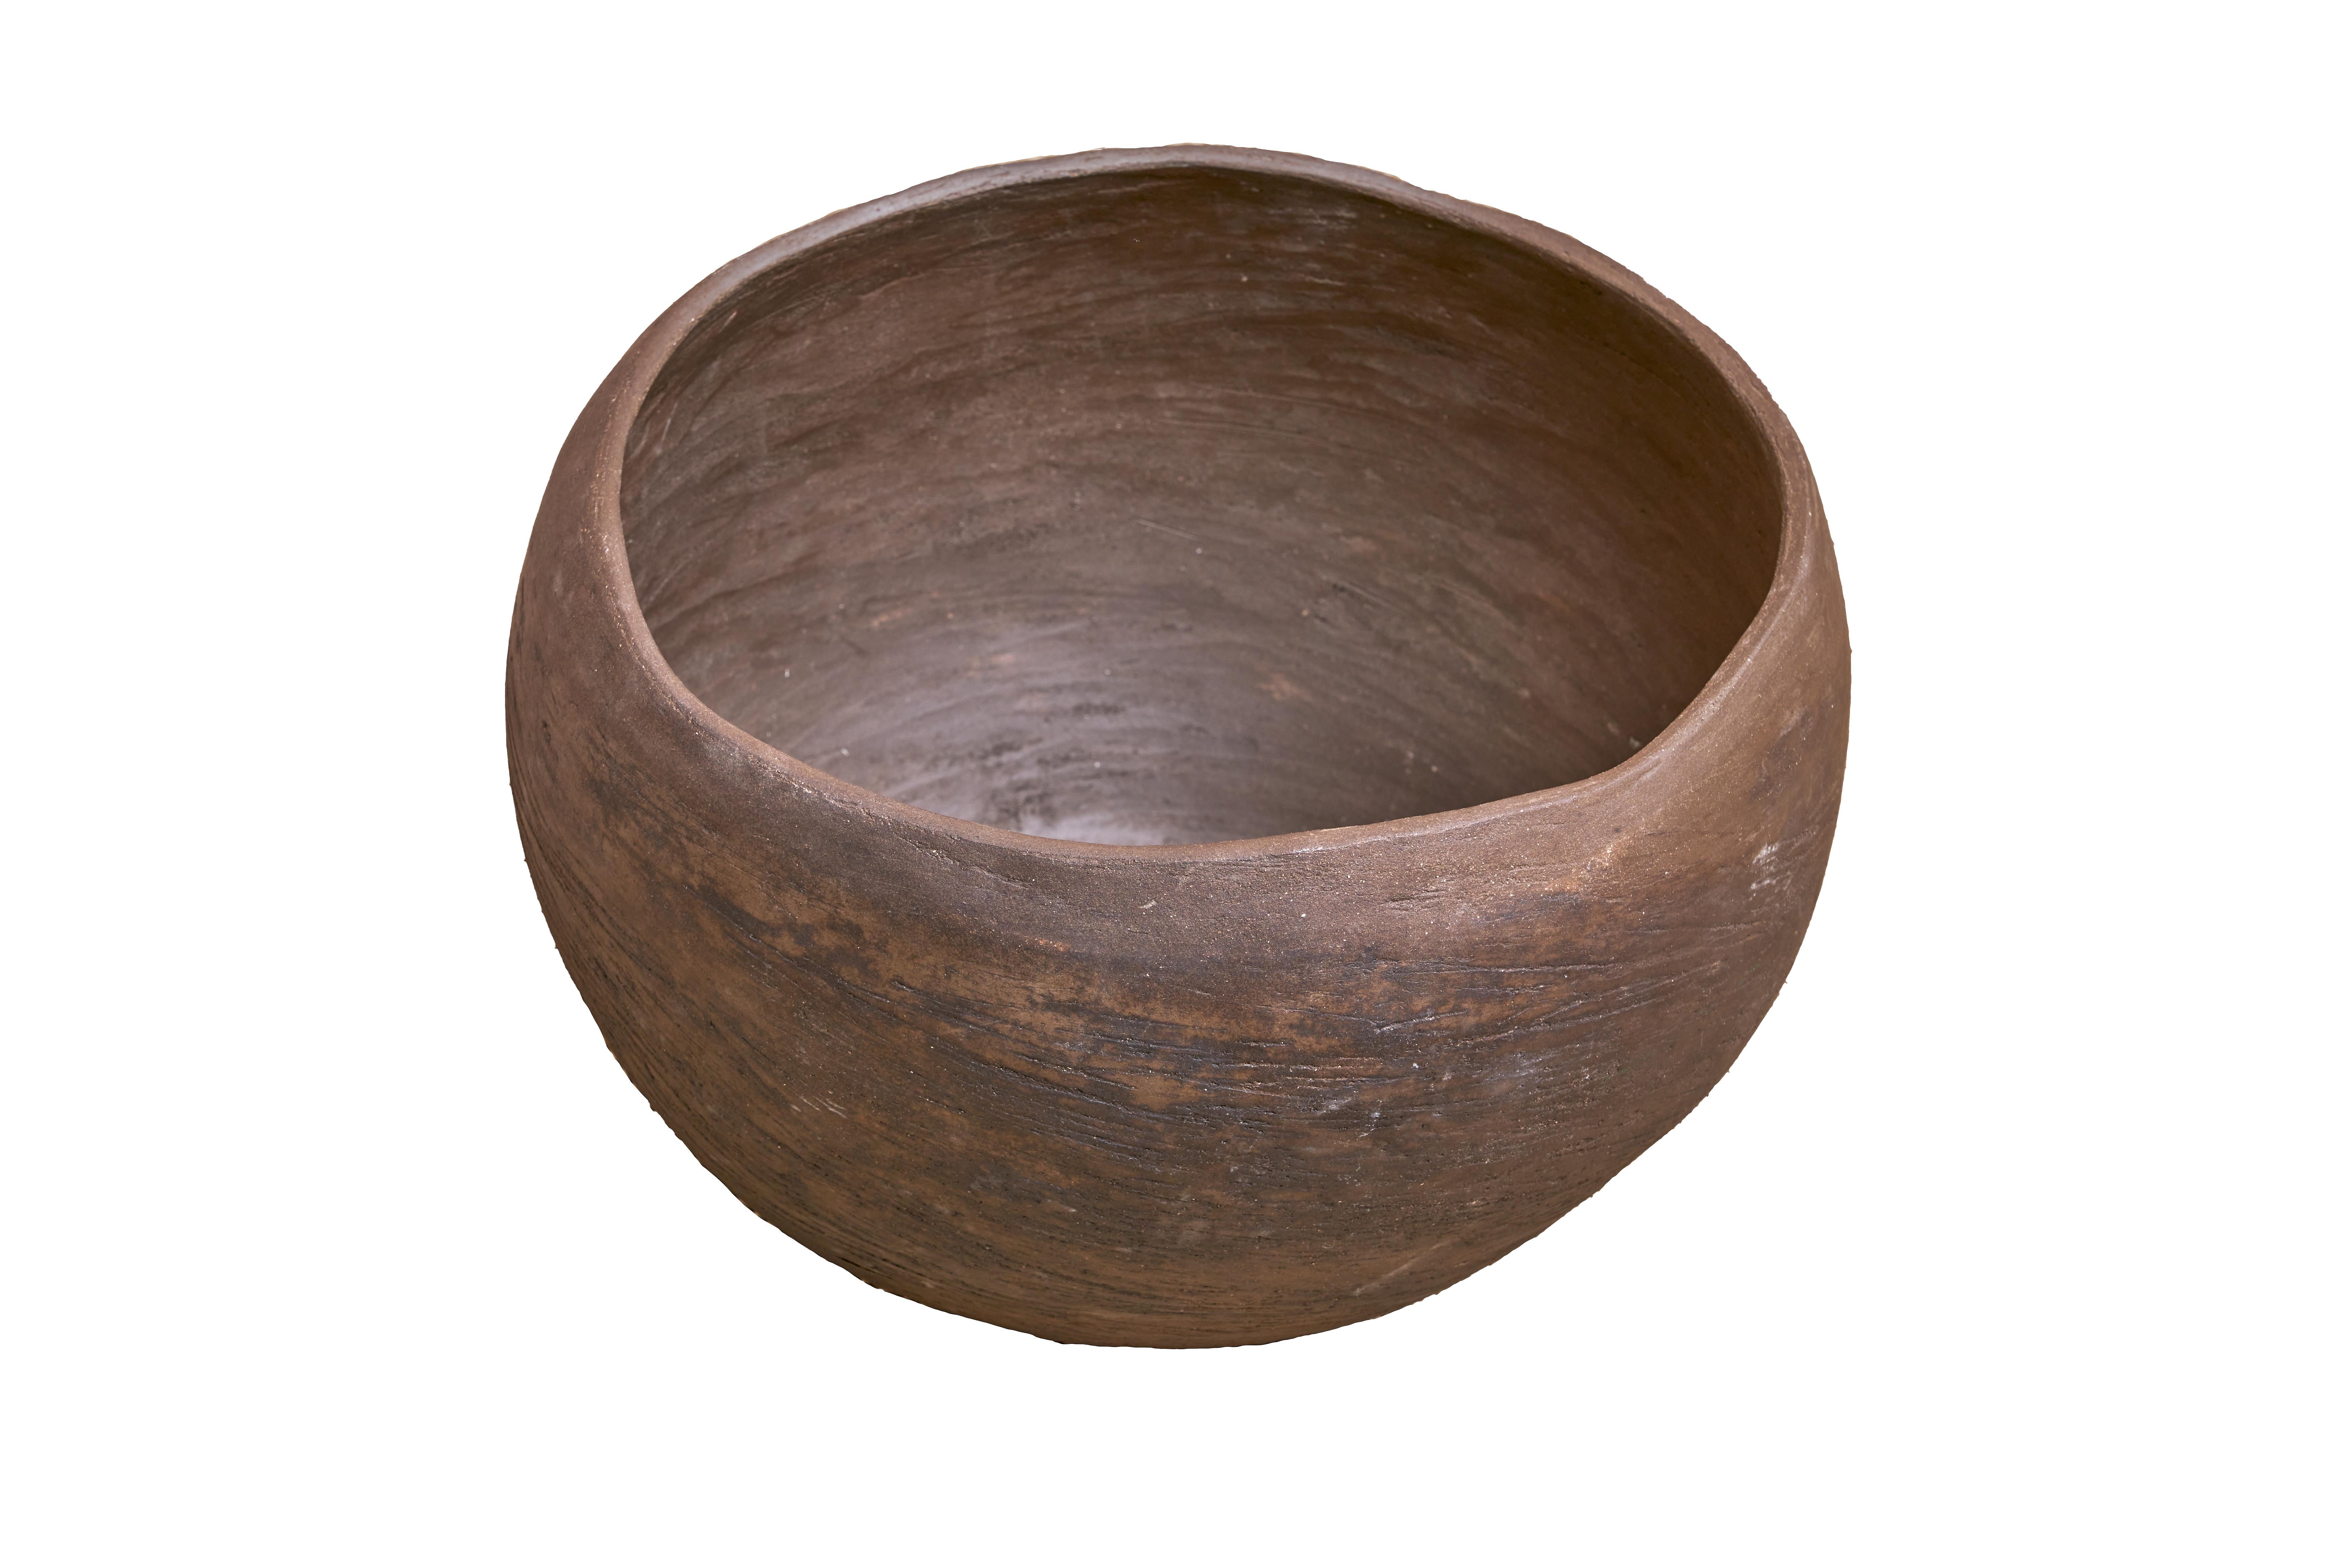 A captivating brown ceramic vessel that combines simplicity and elegance. The rich brown color of this ceramic vessel exudes a sense of earthiness and natural beauty. The vessel is simple yet elegant in design, with a classic shape and clean lines.